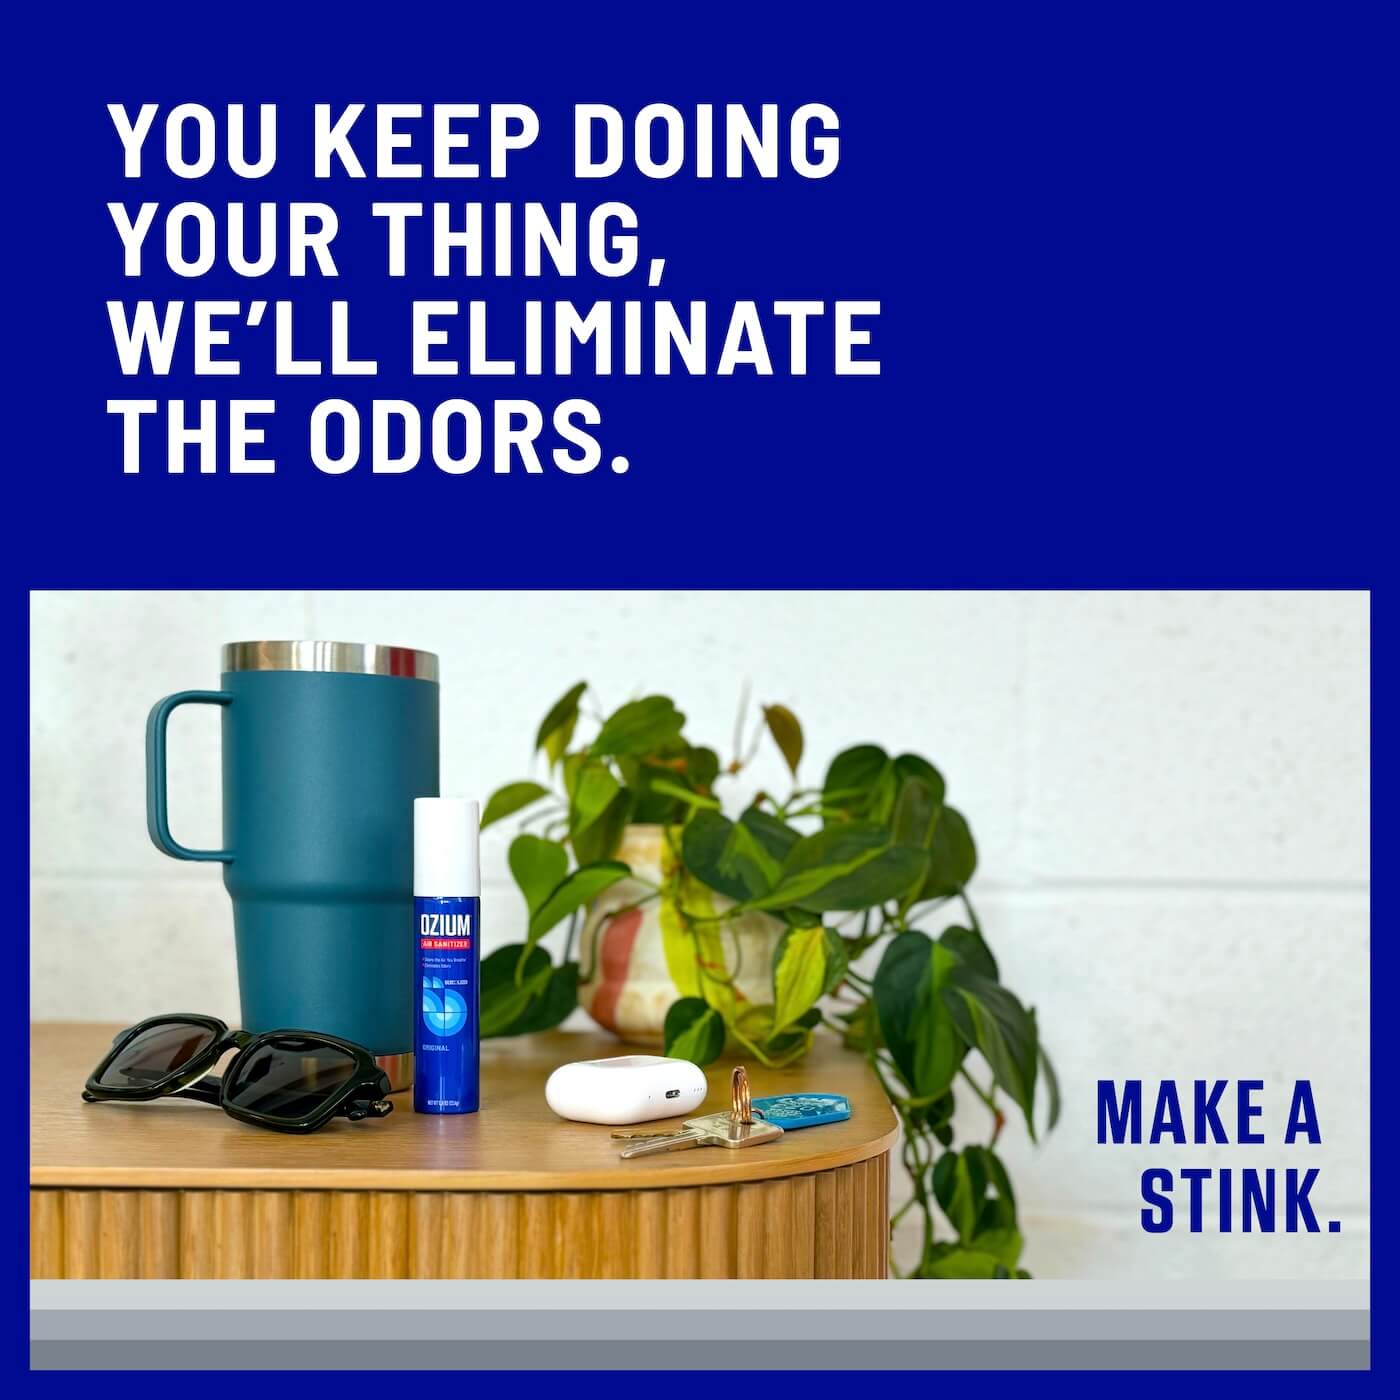 You keep doing your thing, we'll eliminate the odors. Image of Ozium next to coffee mug and sunglasses.